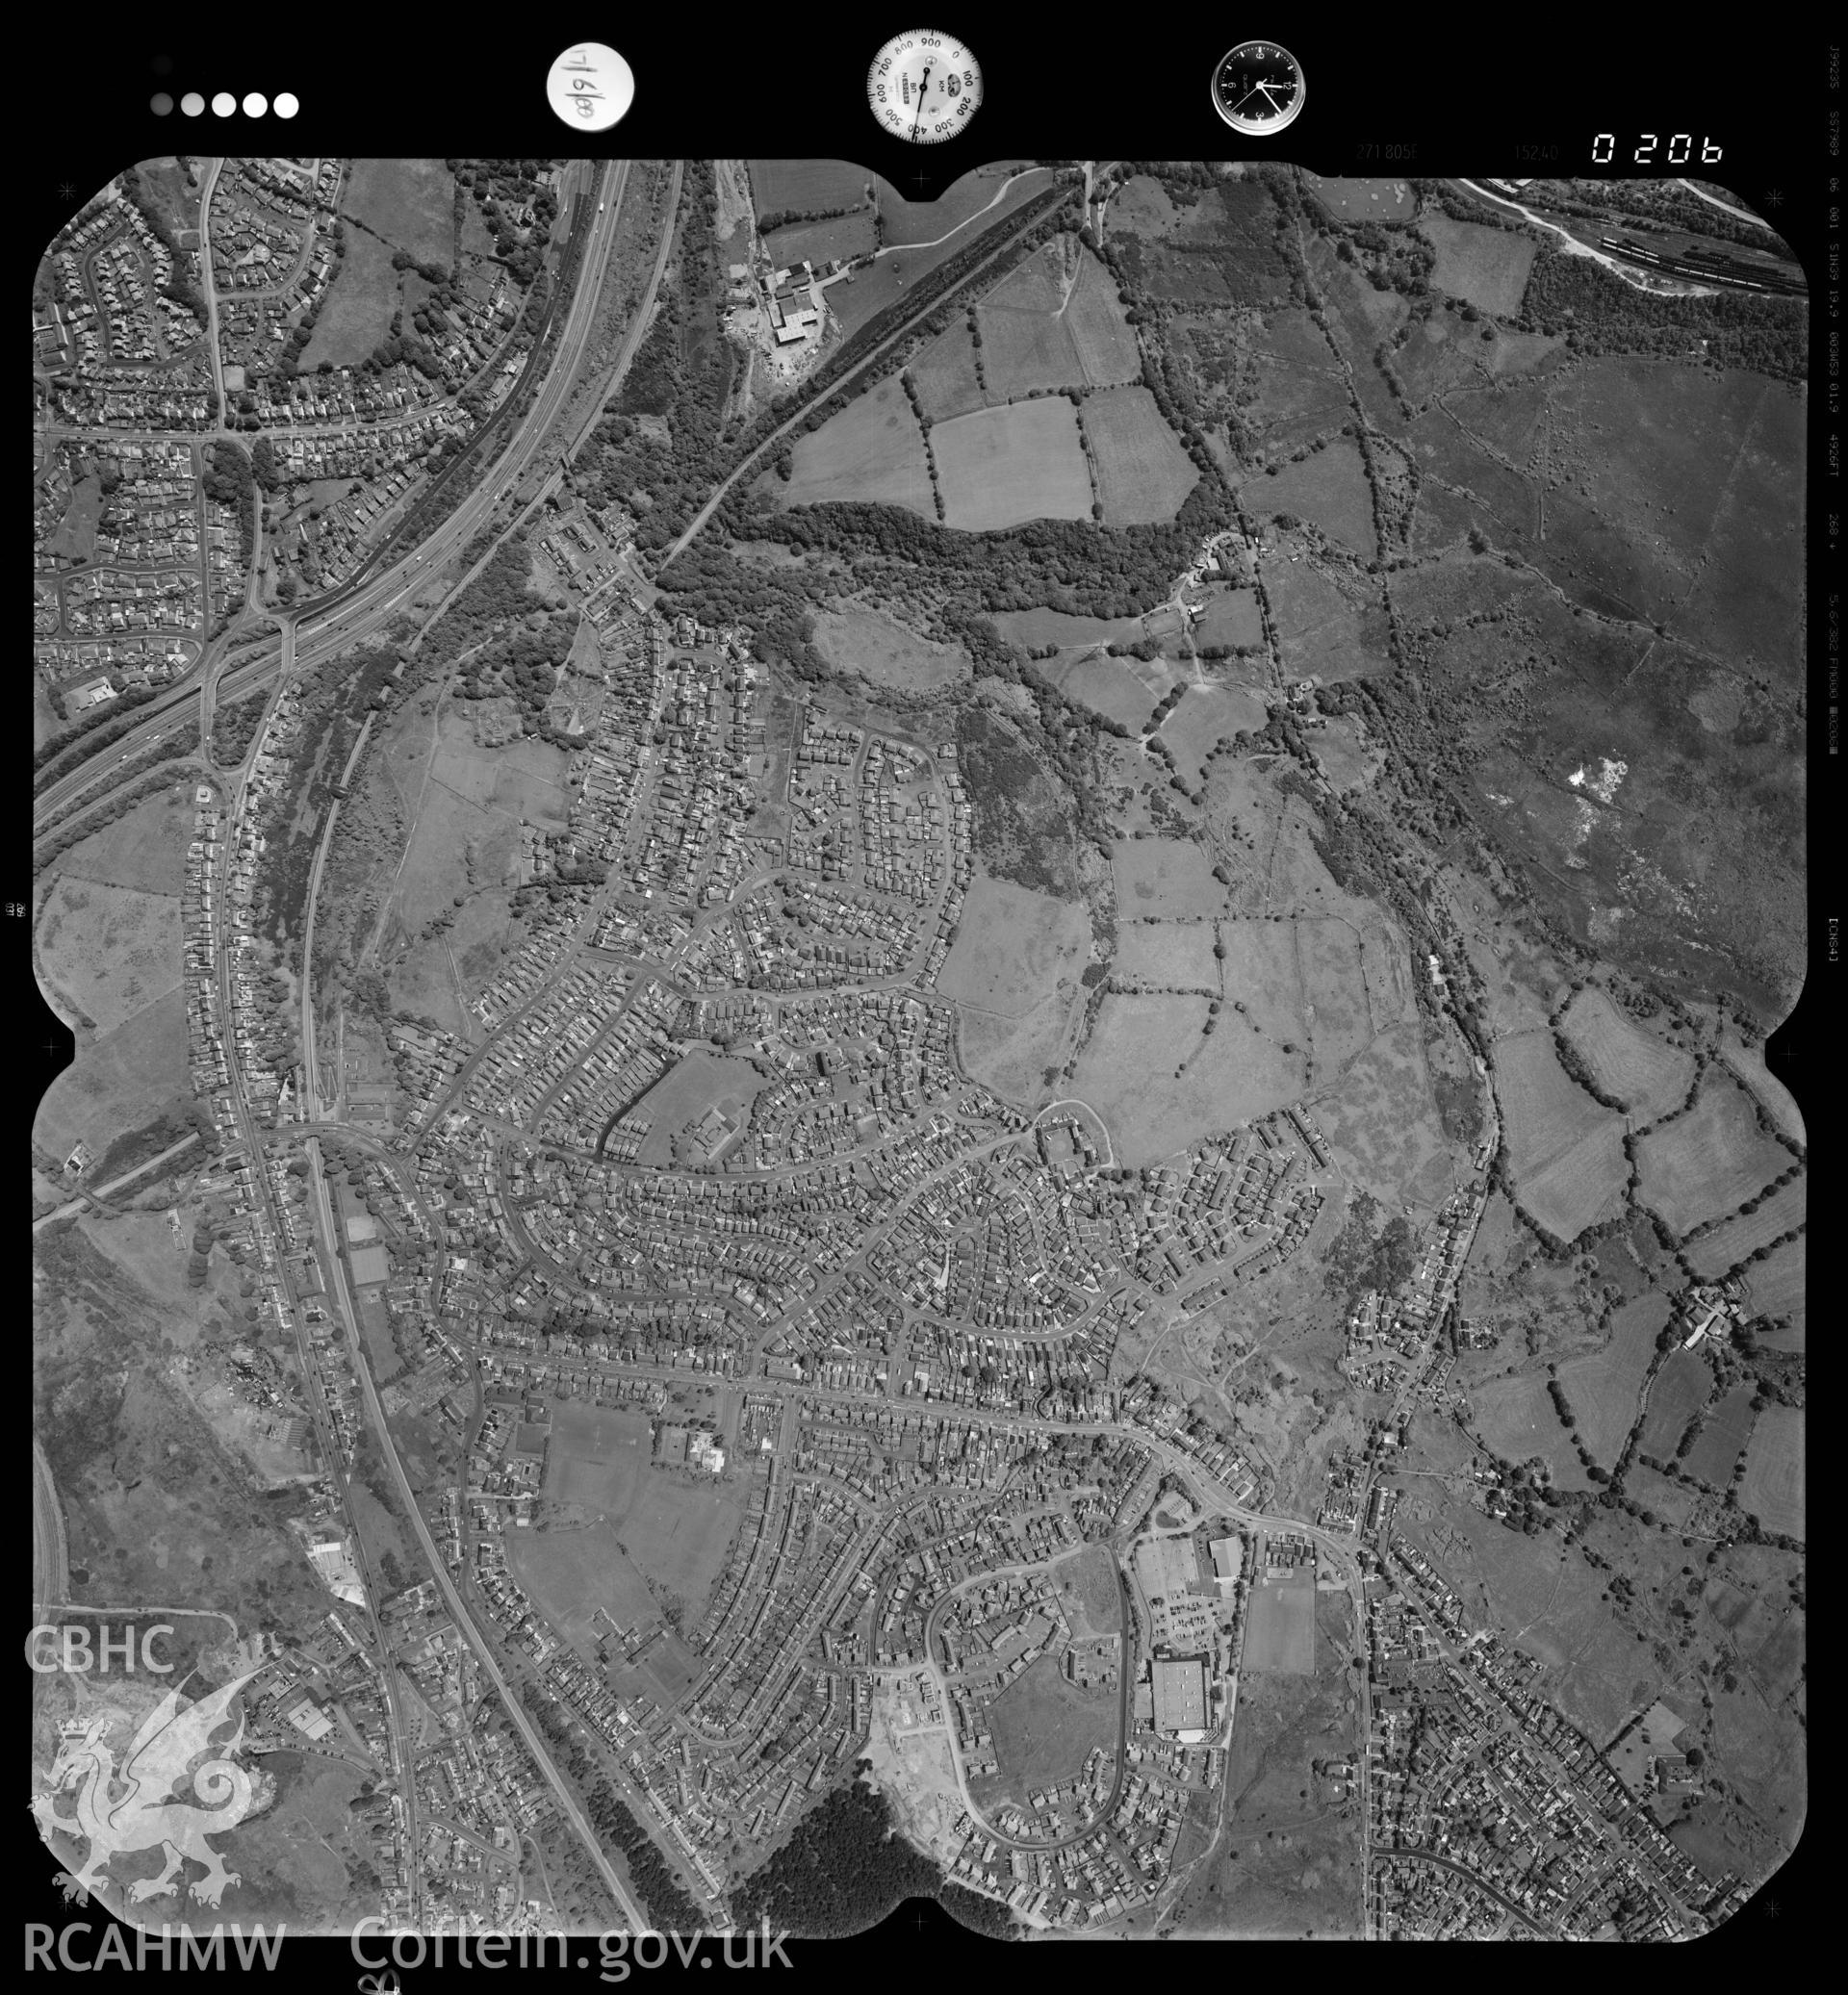 Digitized copy of an aerial photograph showing the Trallwn area of Swansea, taken by Ordnance Survey, 2000.